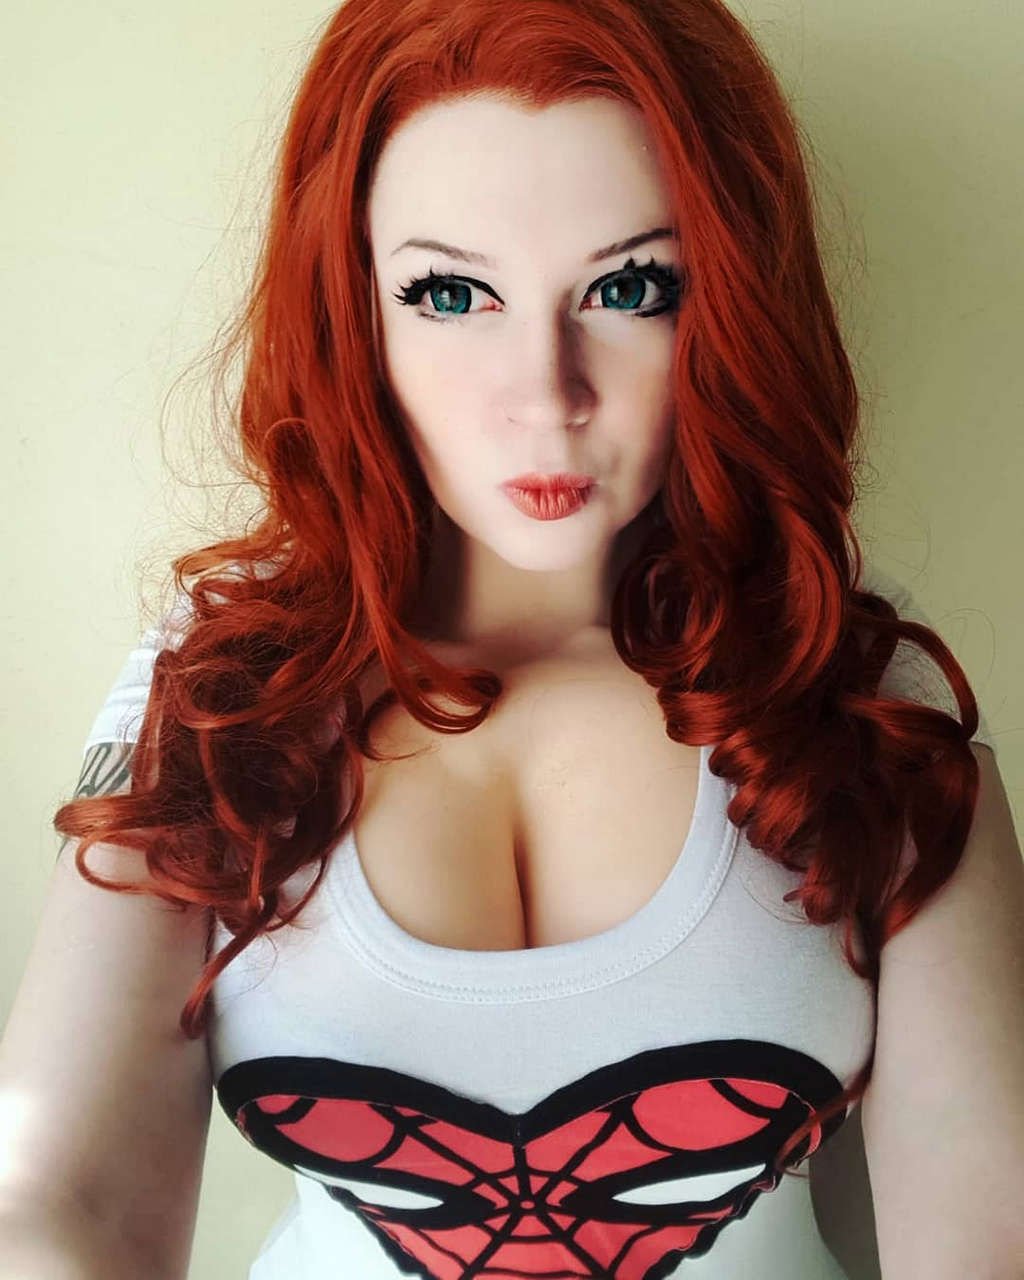 Inuki Prince As Mary Jane From Spiderman 00